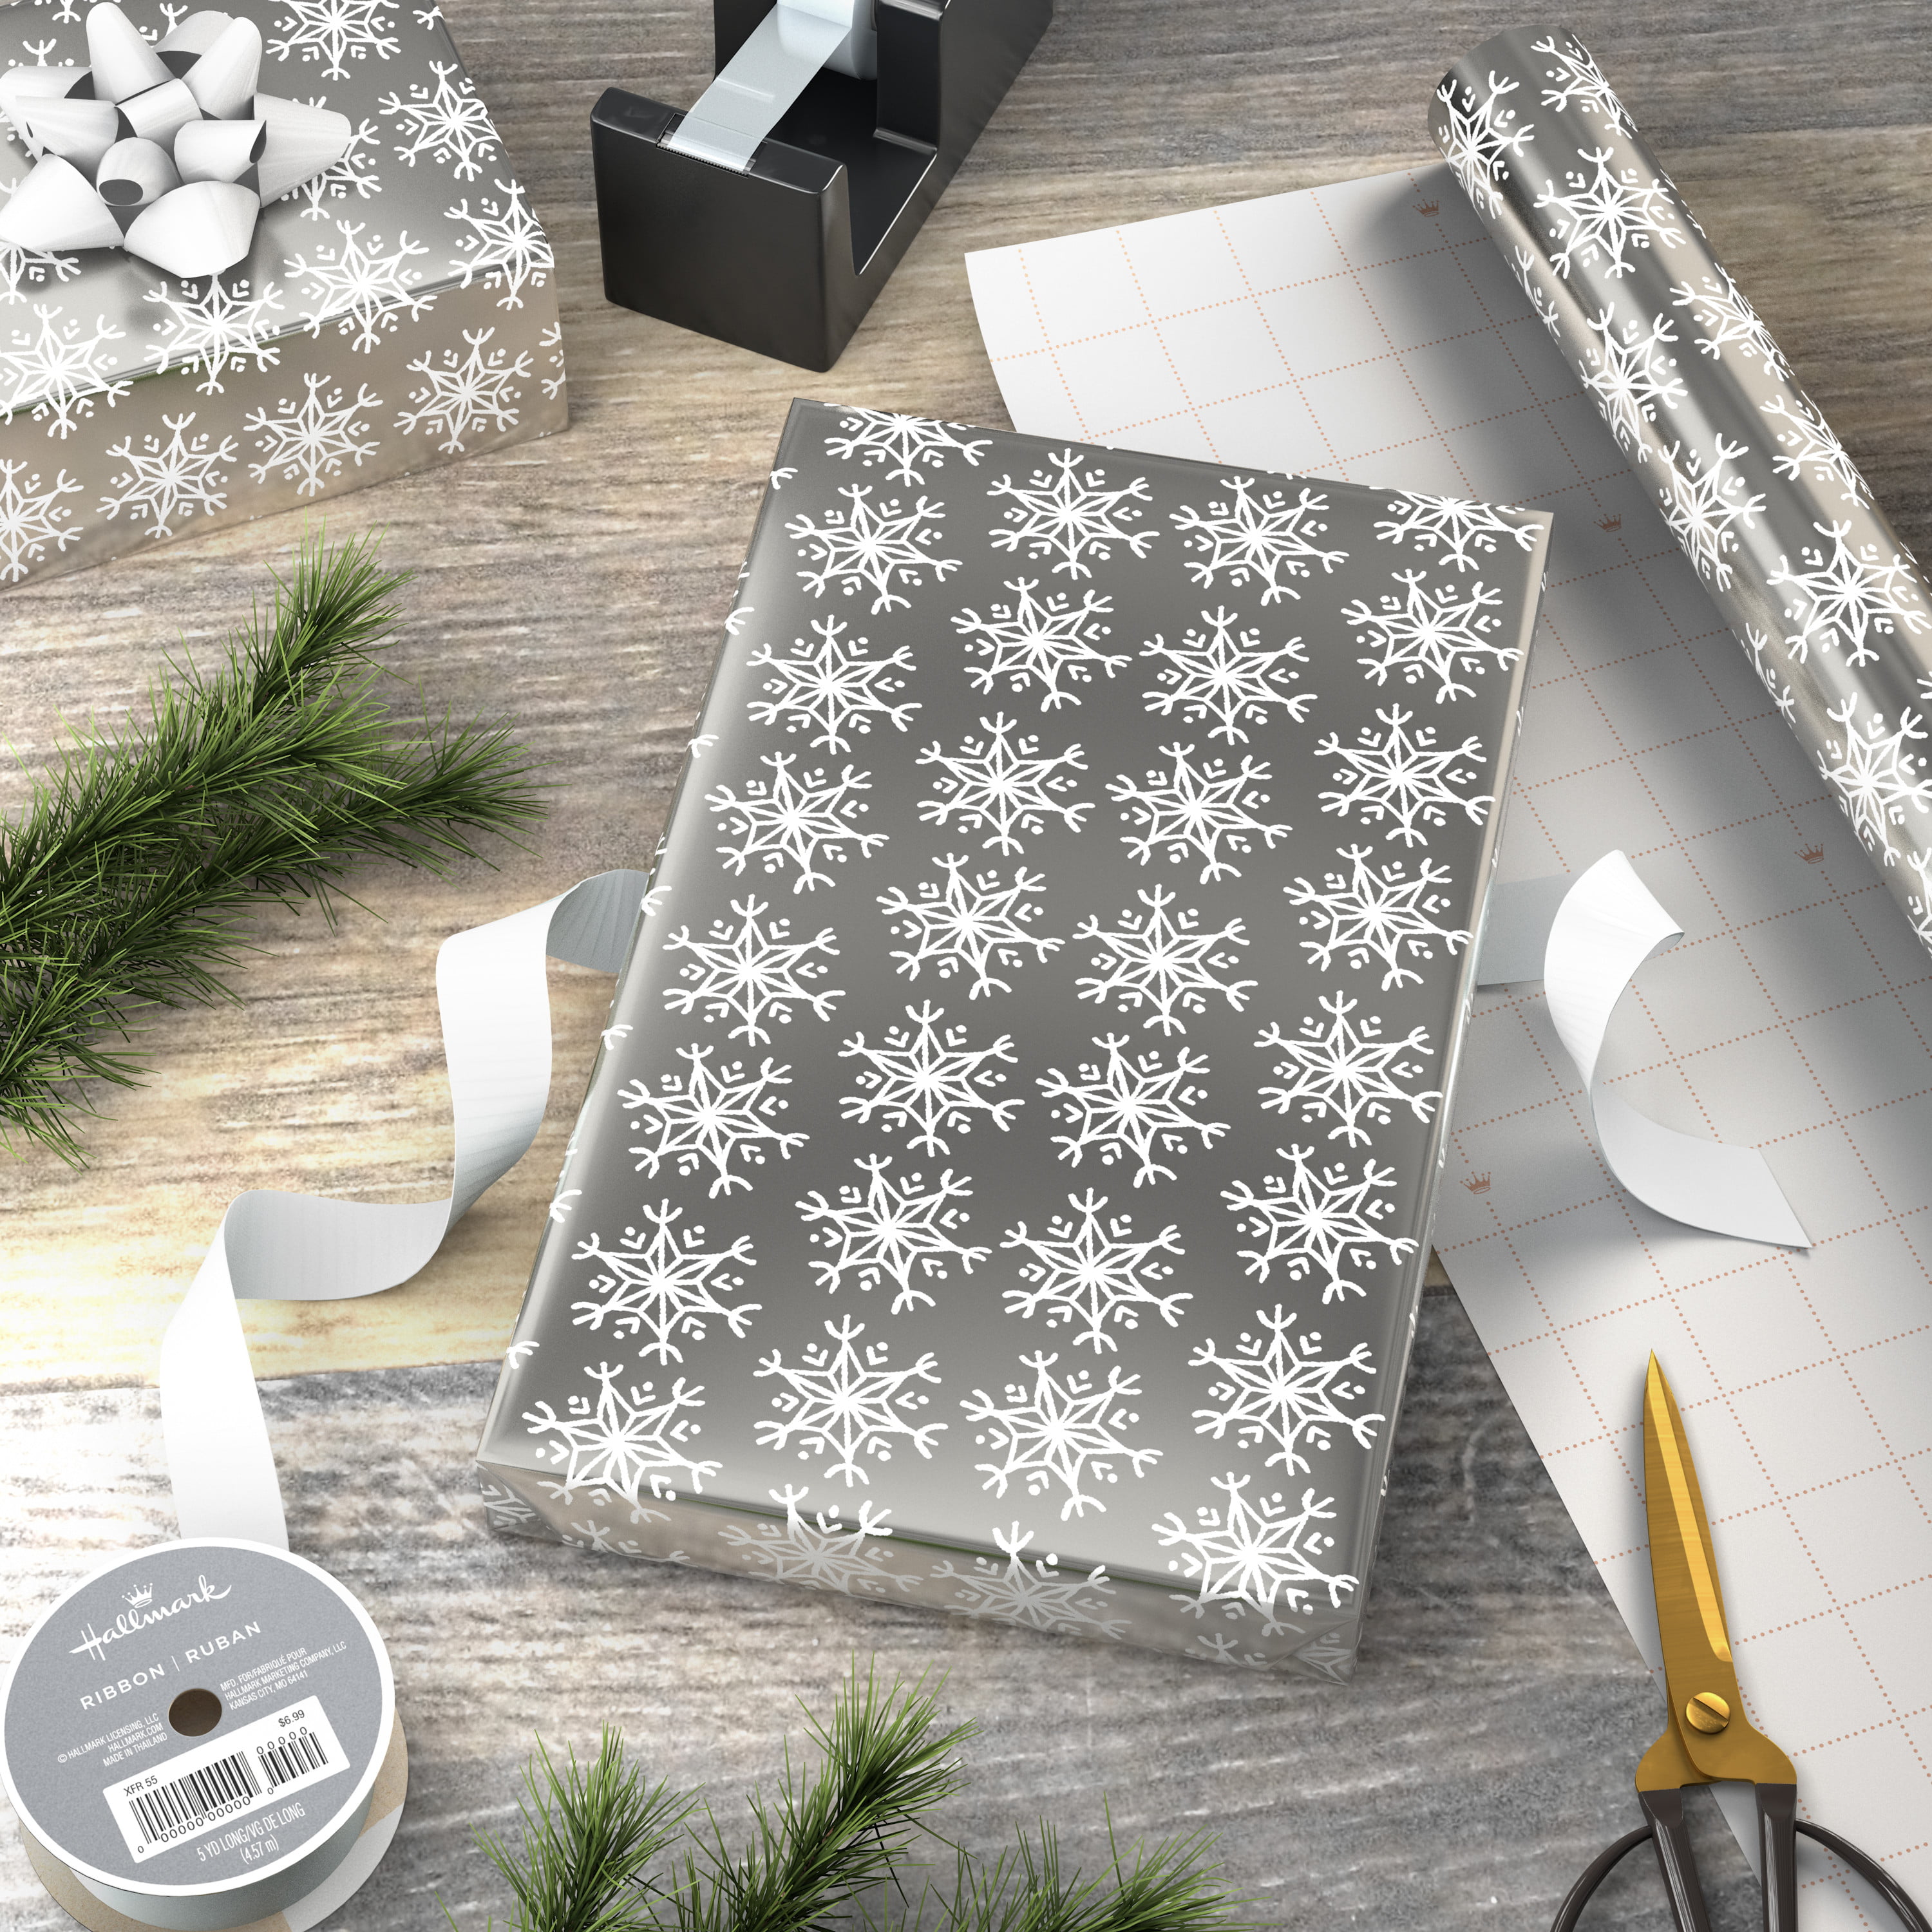  Silver Snowflake Tissue Paper for Gift Wrapping